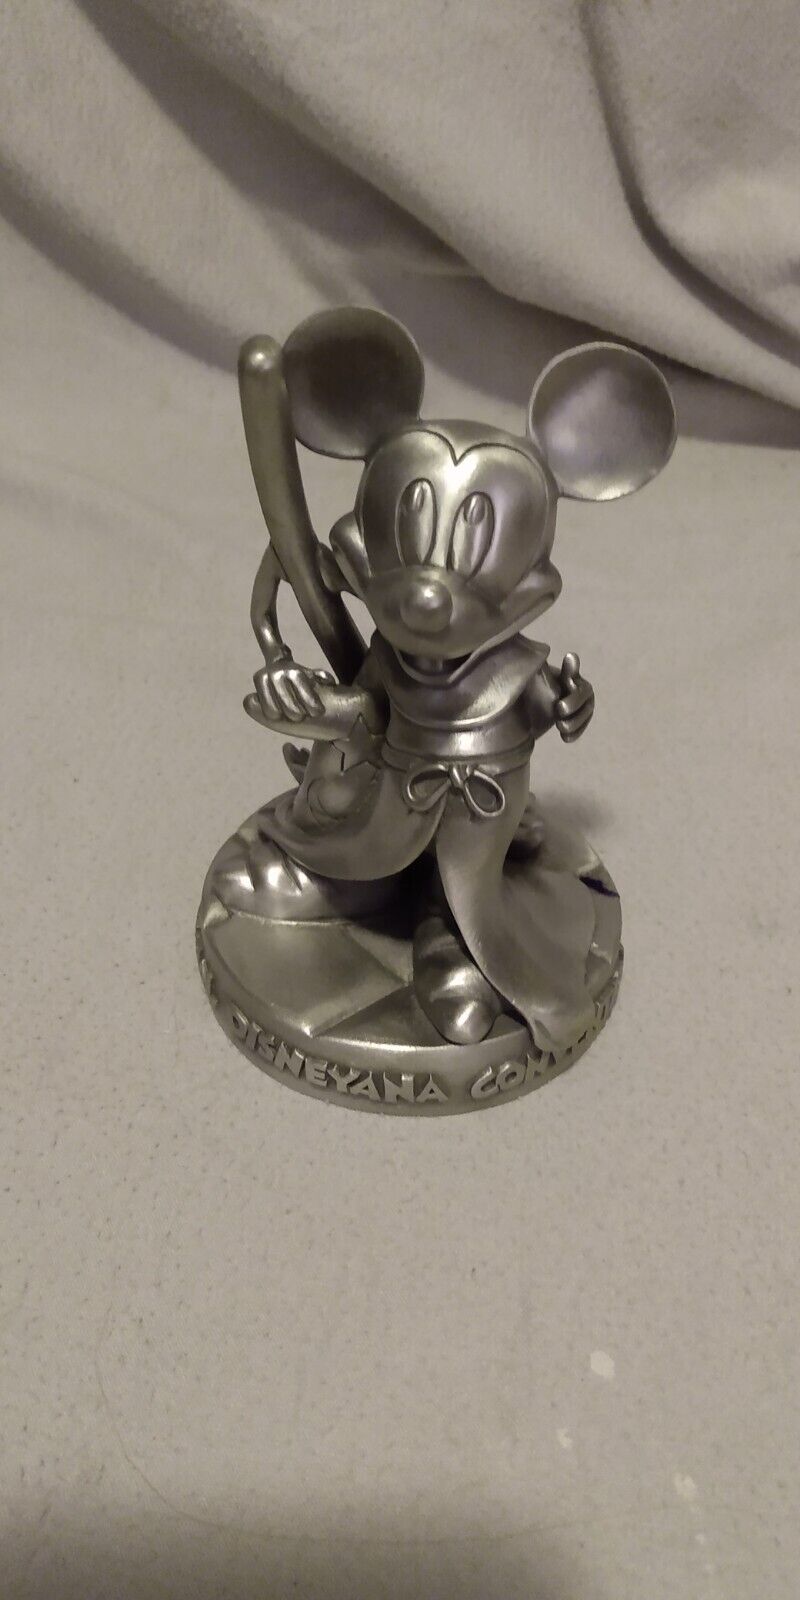 1994 Disneyana Convention  Official Limited Edition Pewter Statue 